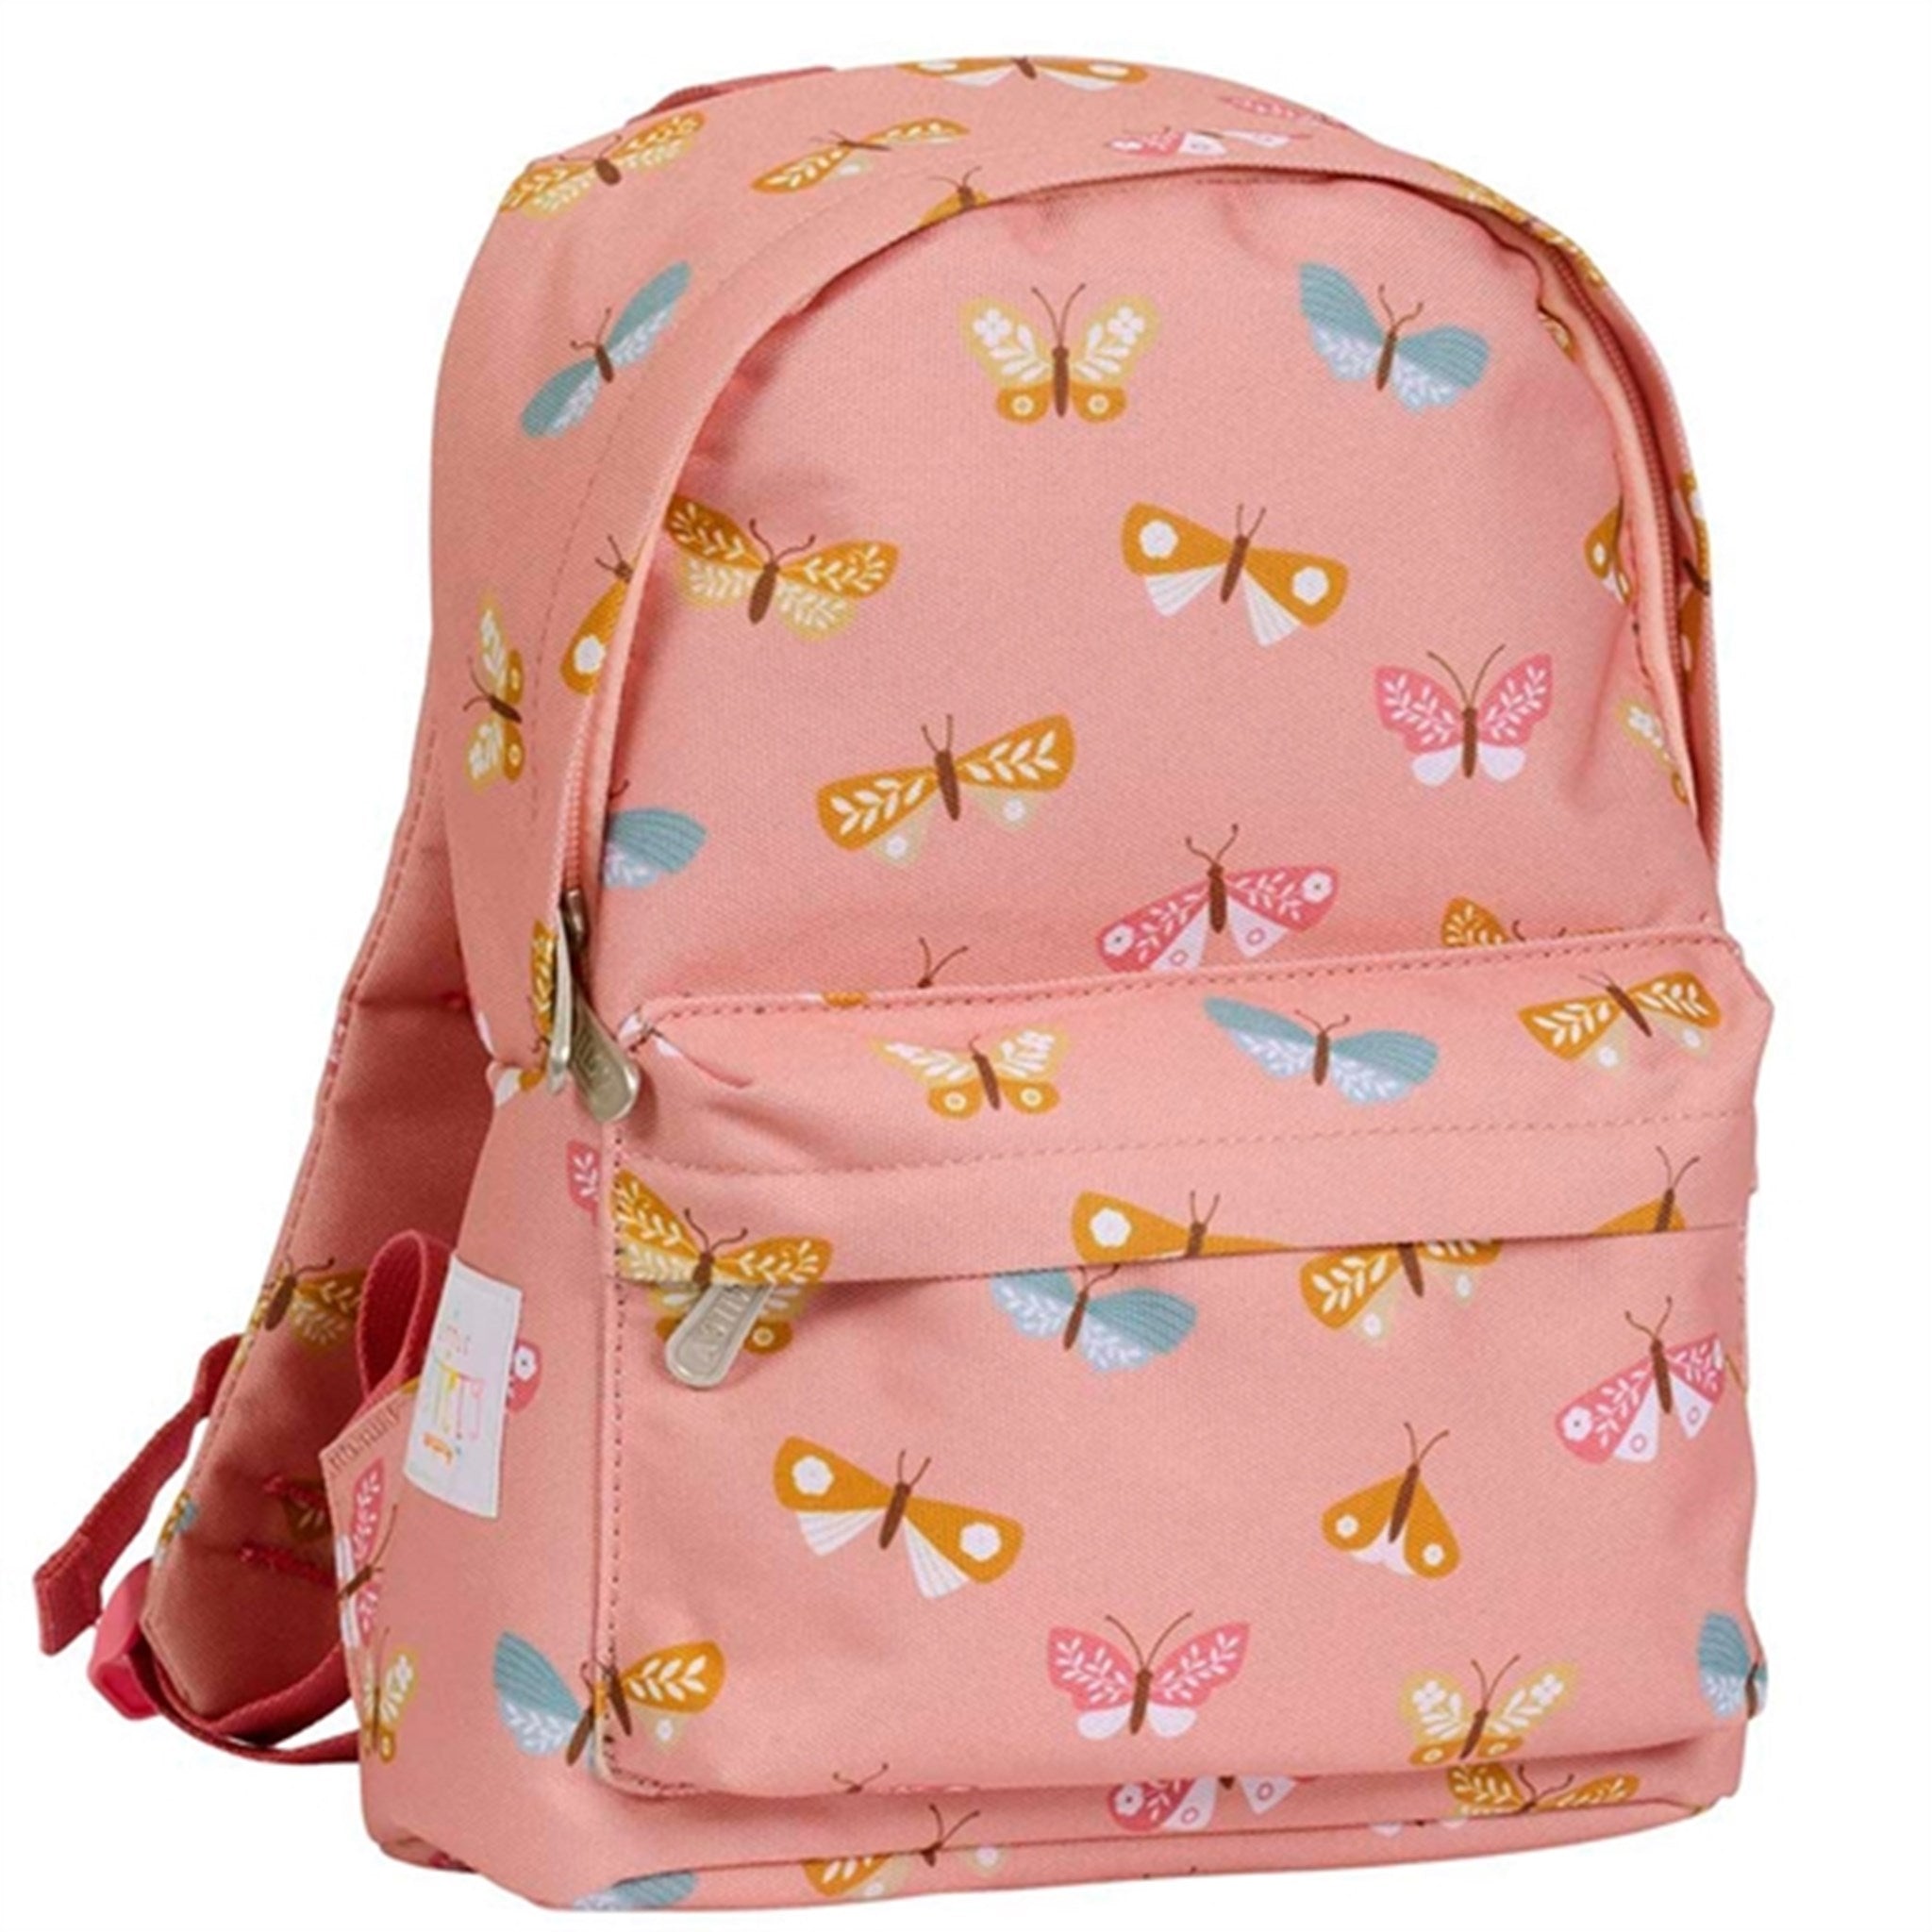 A Little Lovely Company Backpack Small Butterflies 2